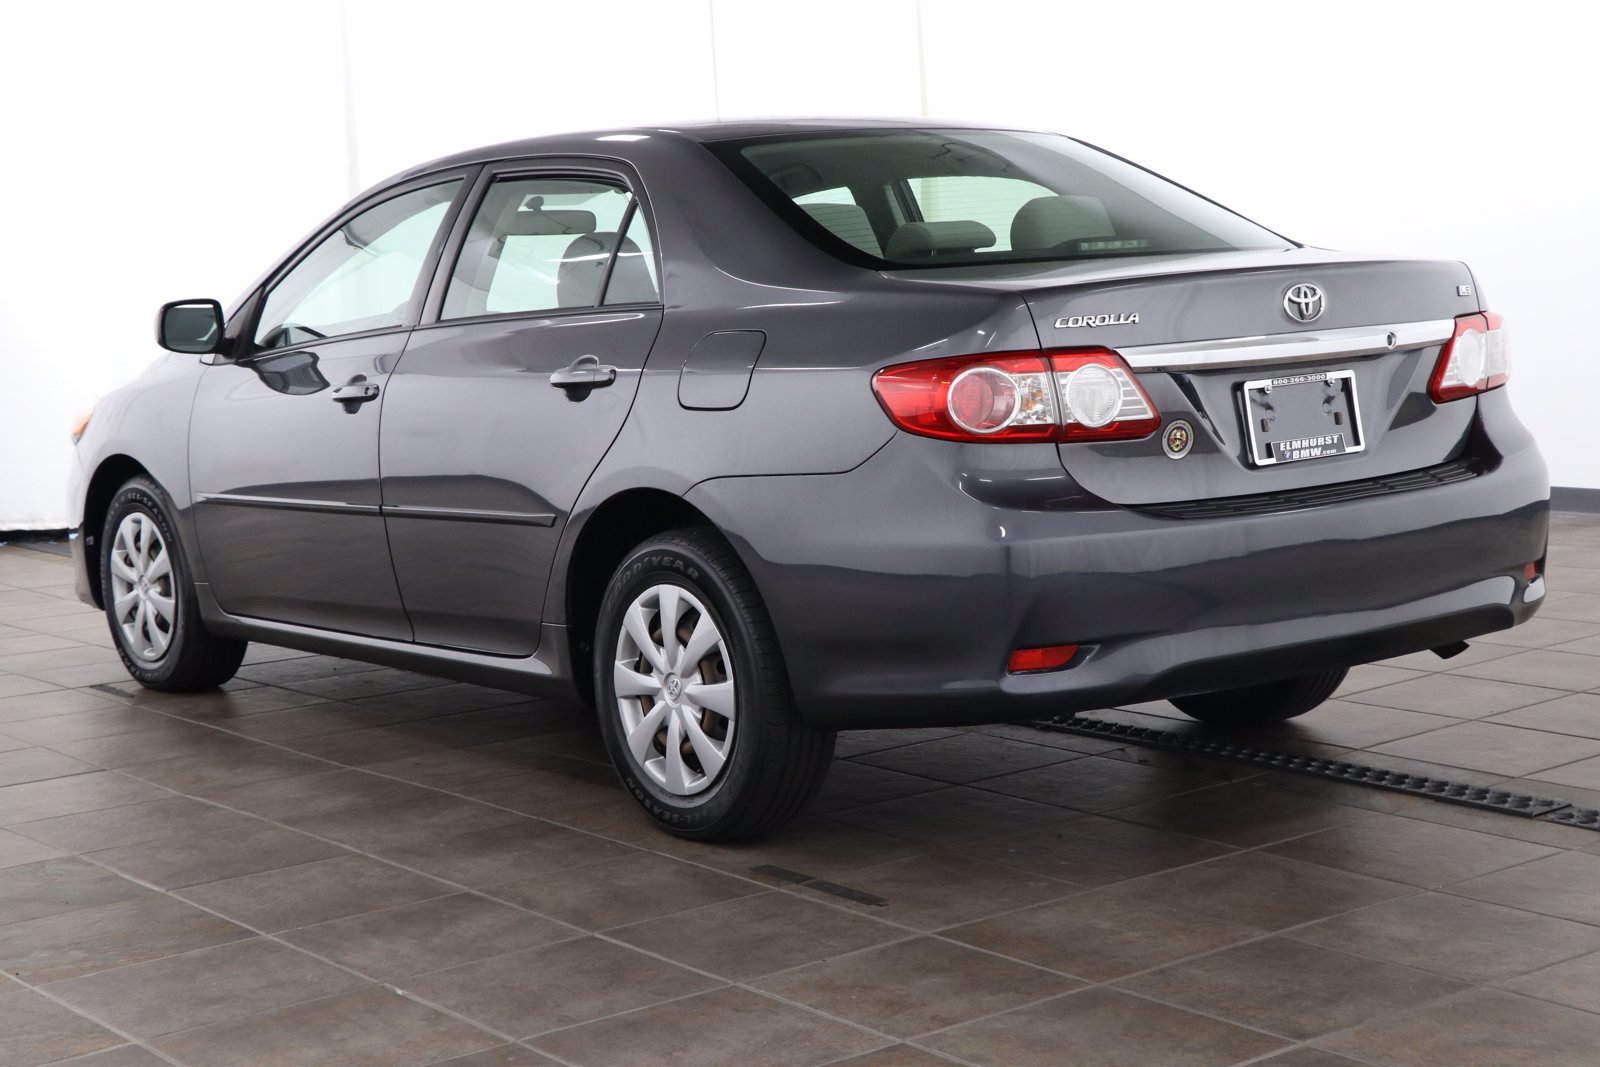 Pre-Owned 2011 Toyota Corolla LE 4dr Car in Elmhurst #B3785PA